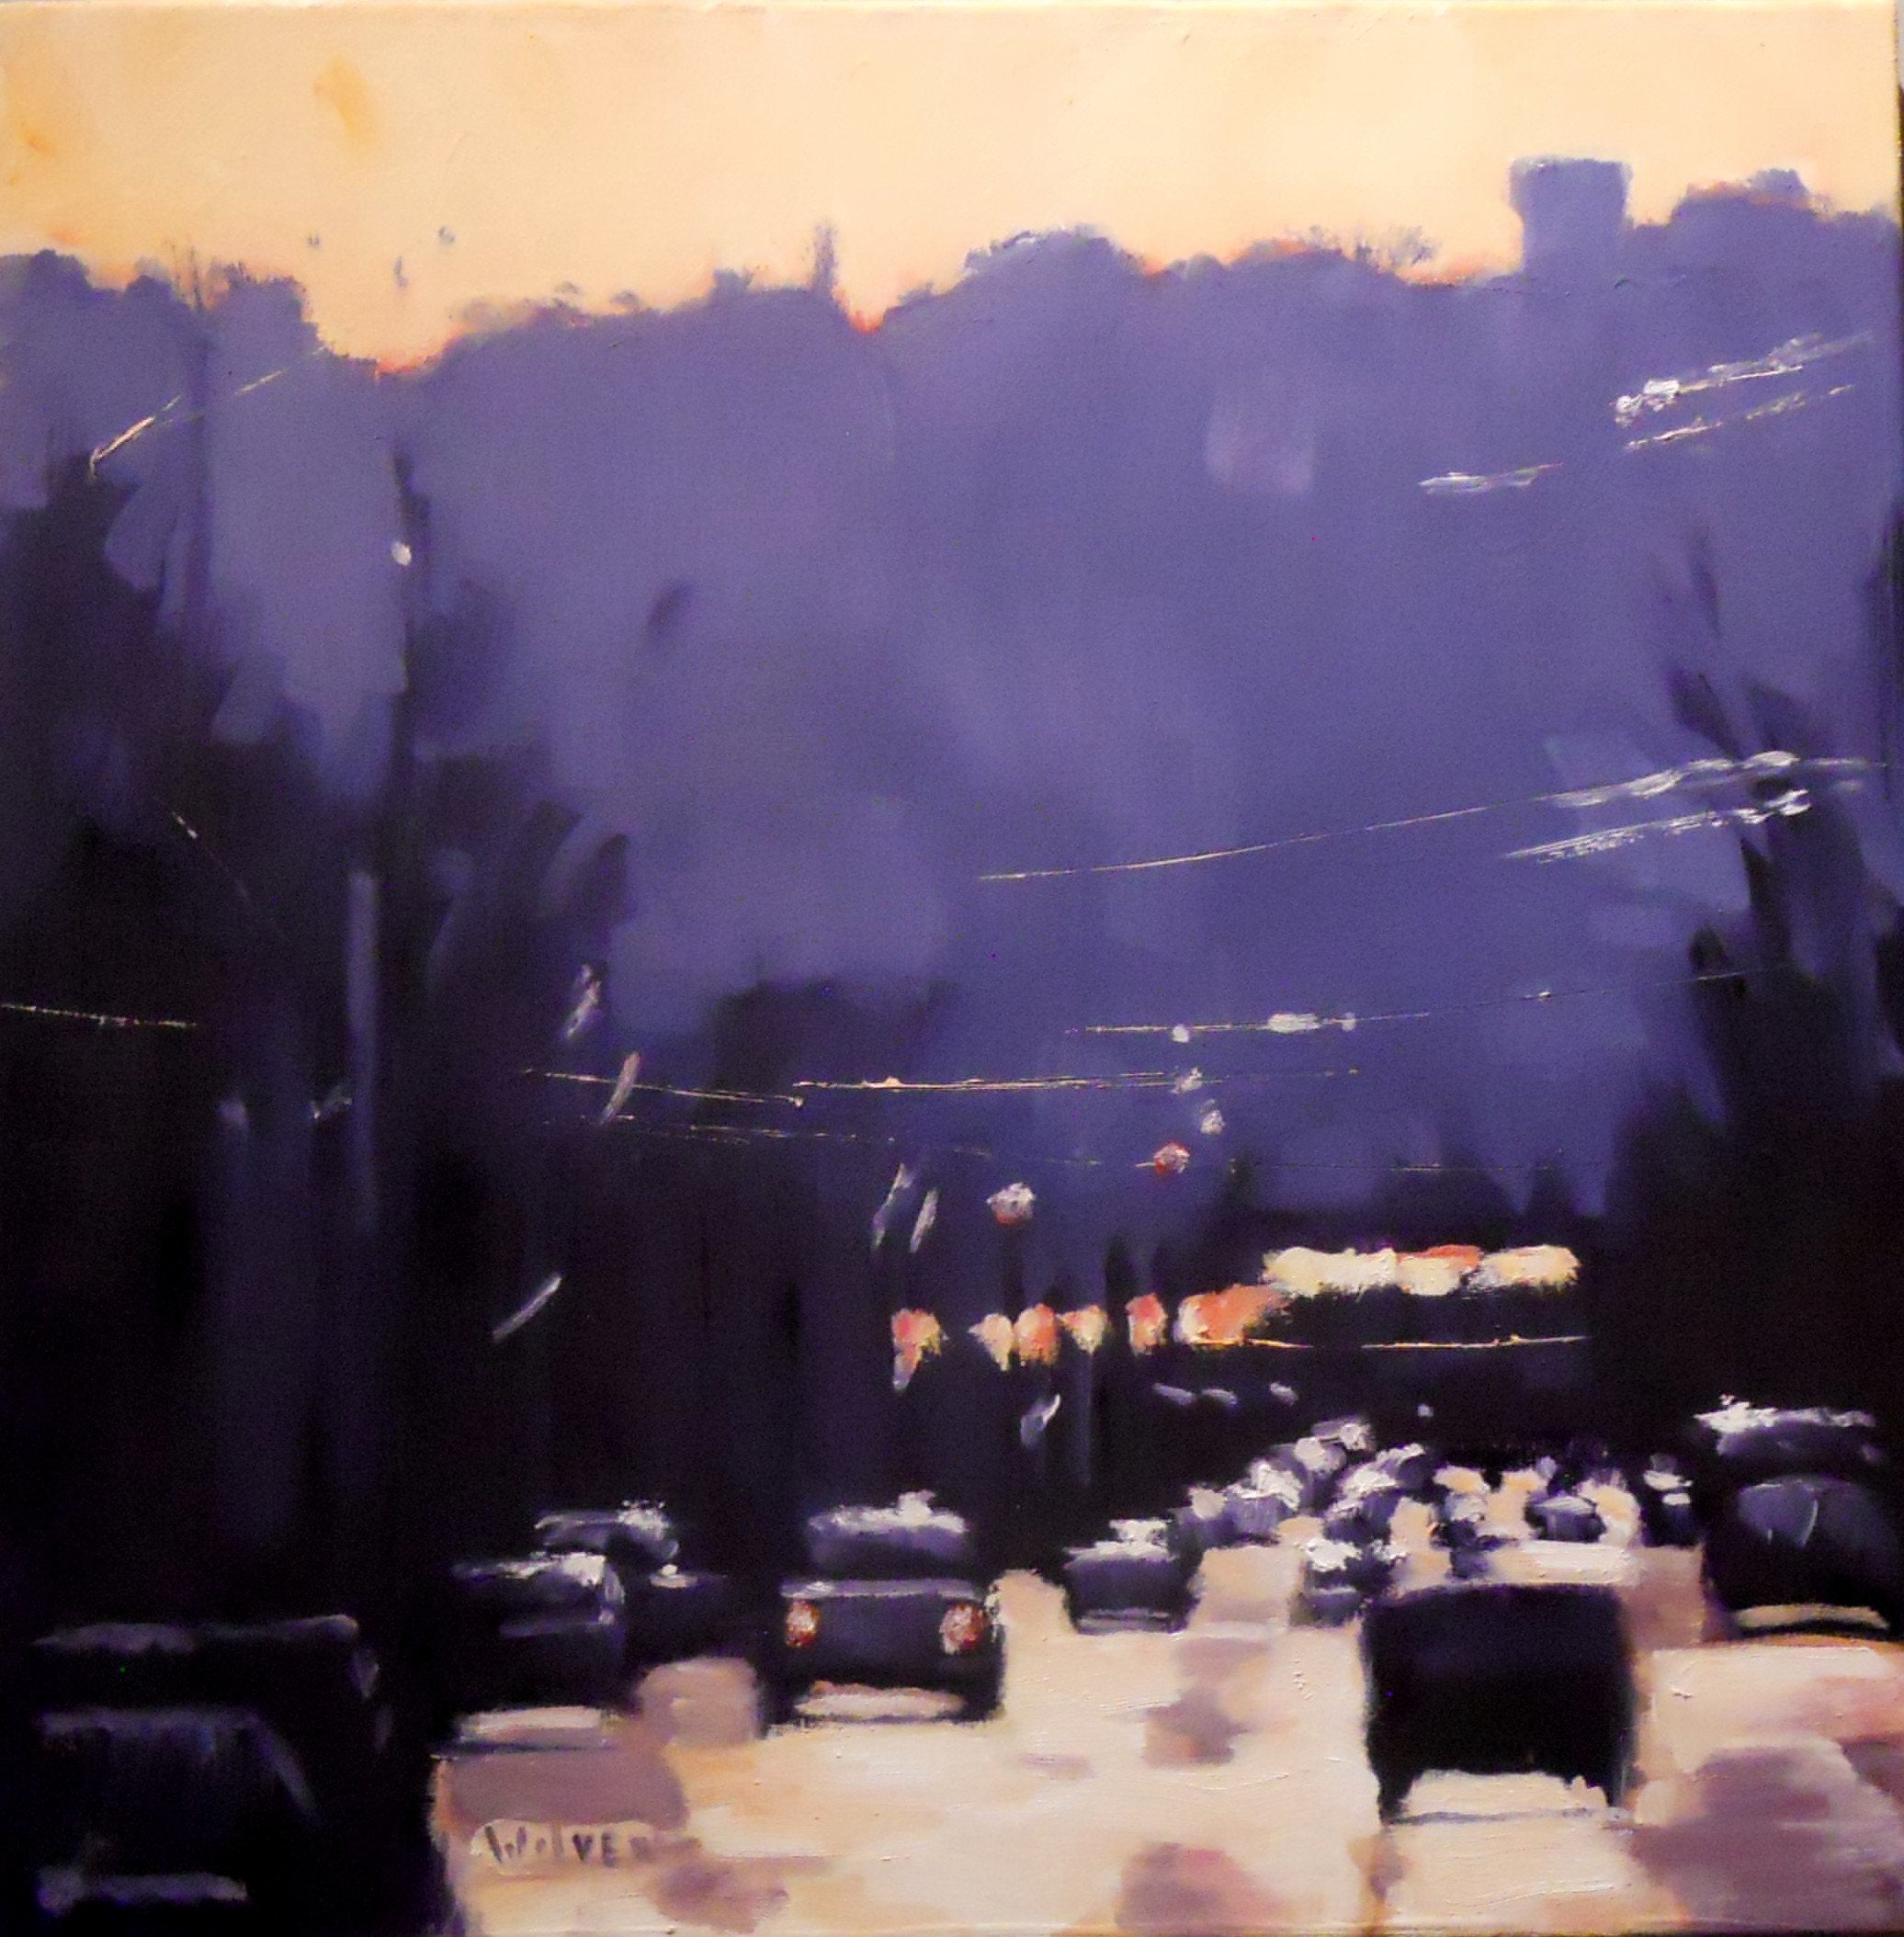 10th Street Newport, KY Painting Paul Wolven 